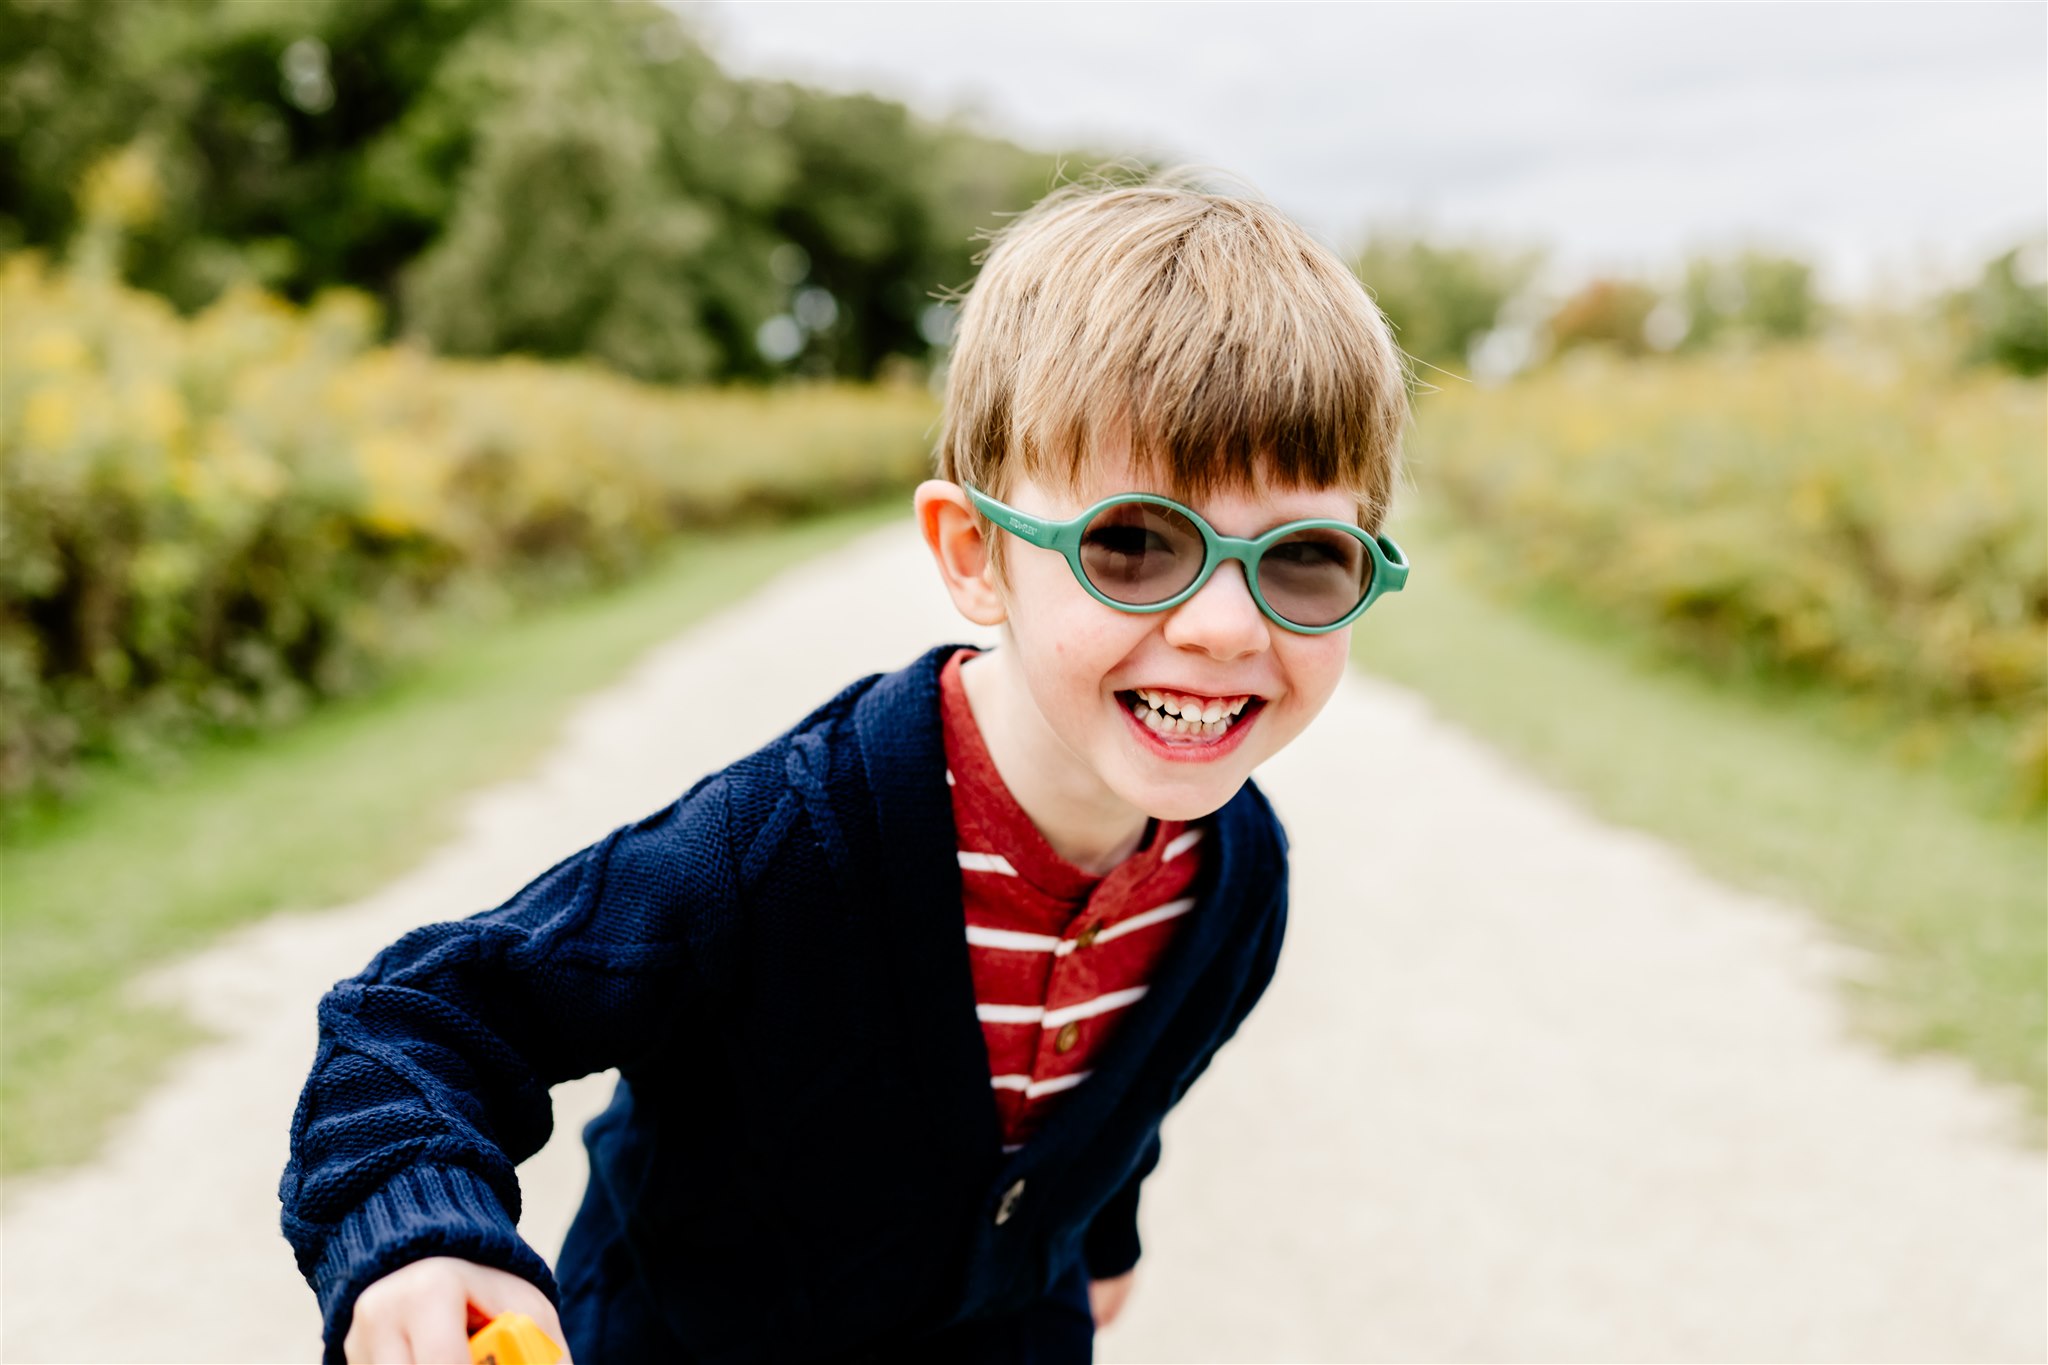 A young boy laughs while walking through a park path in a blue sweater and green glasses